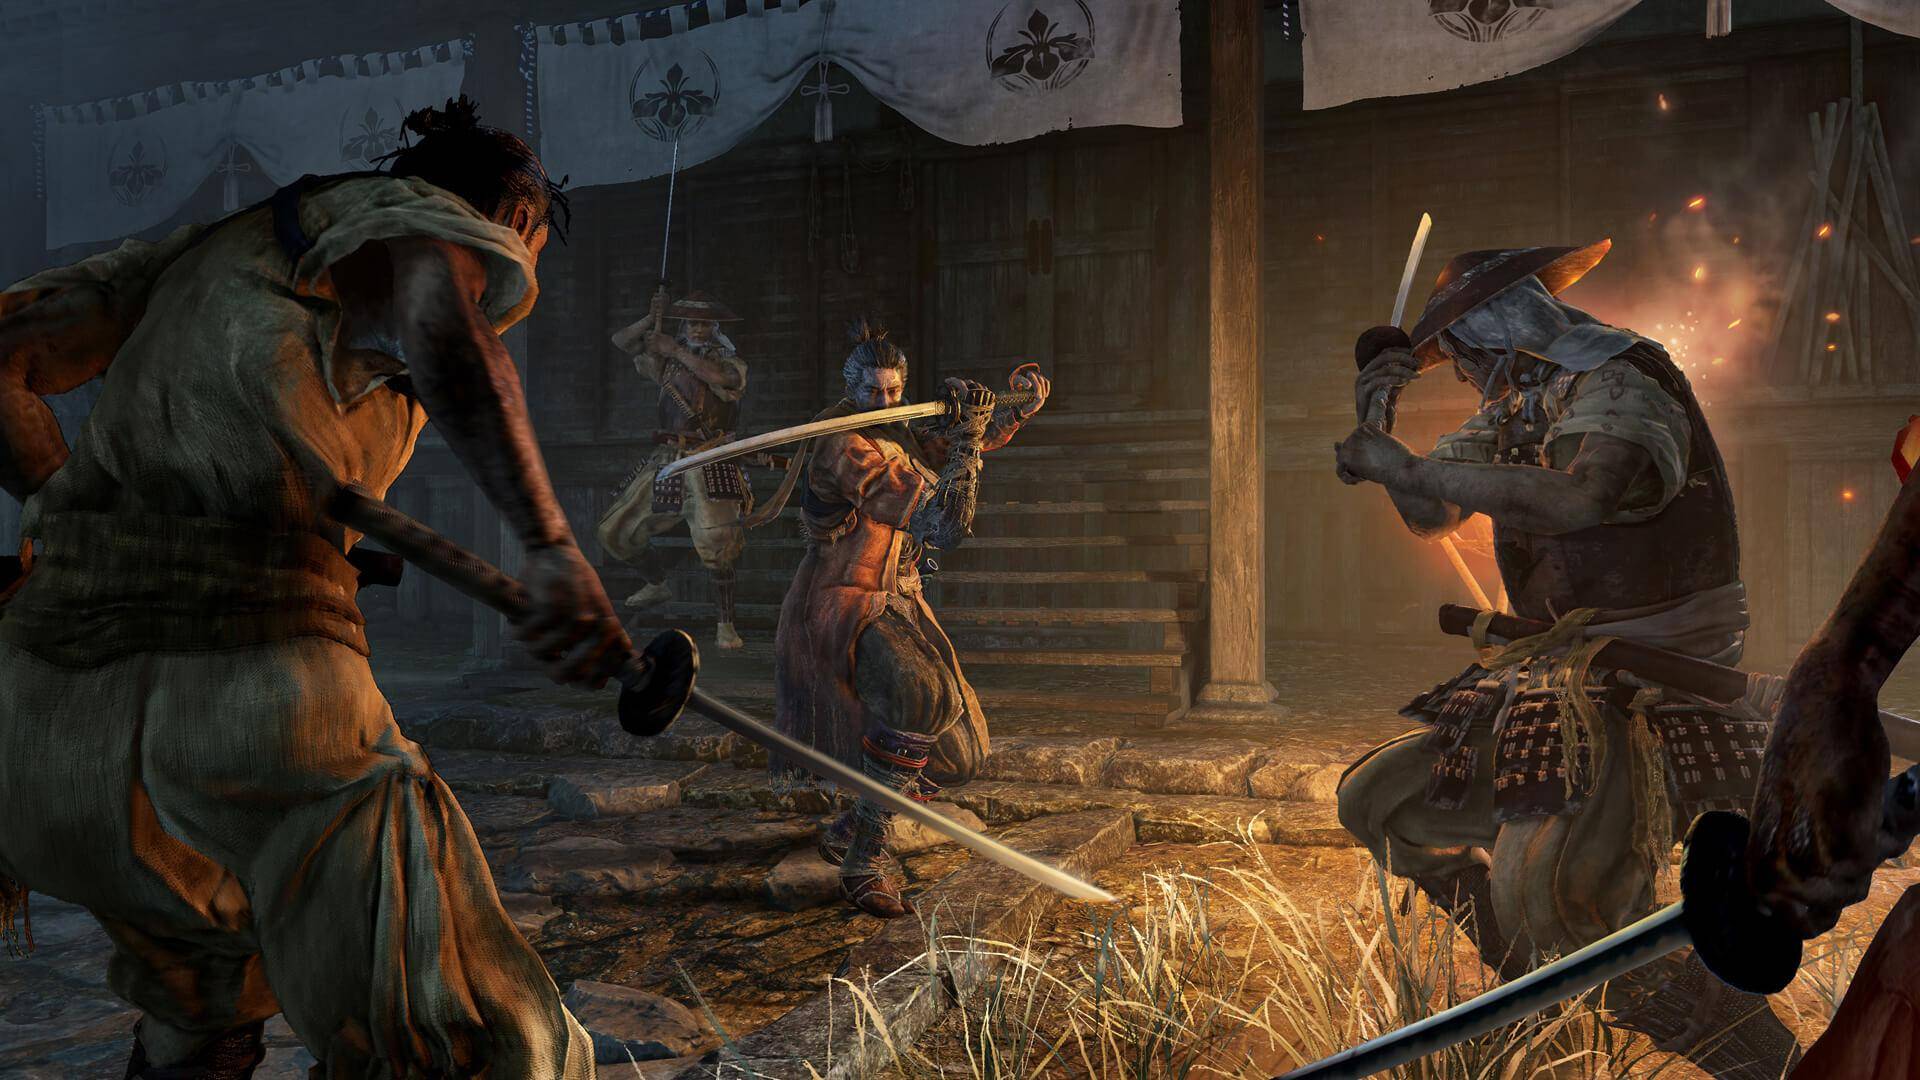 Sekiro: Shadows Die Twice is getting a new gameplay mode and some other surprises